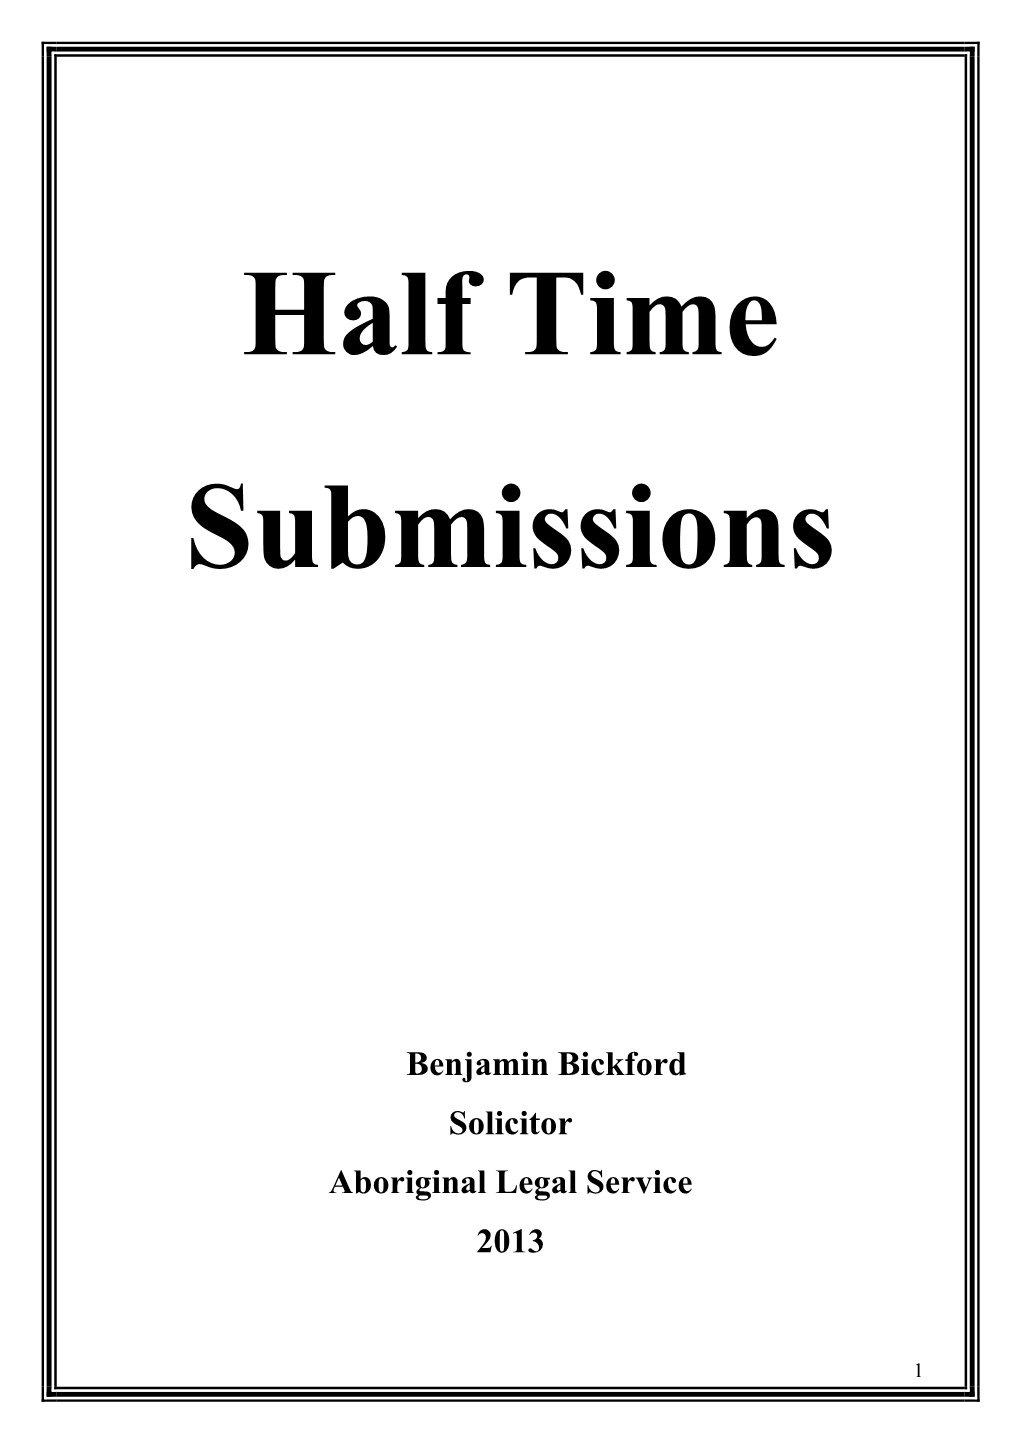 Half-Time Submissions – Benjamin Bickford